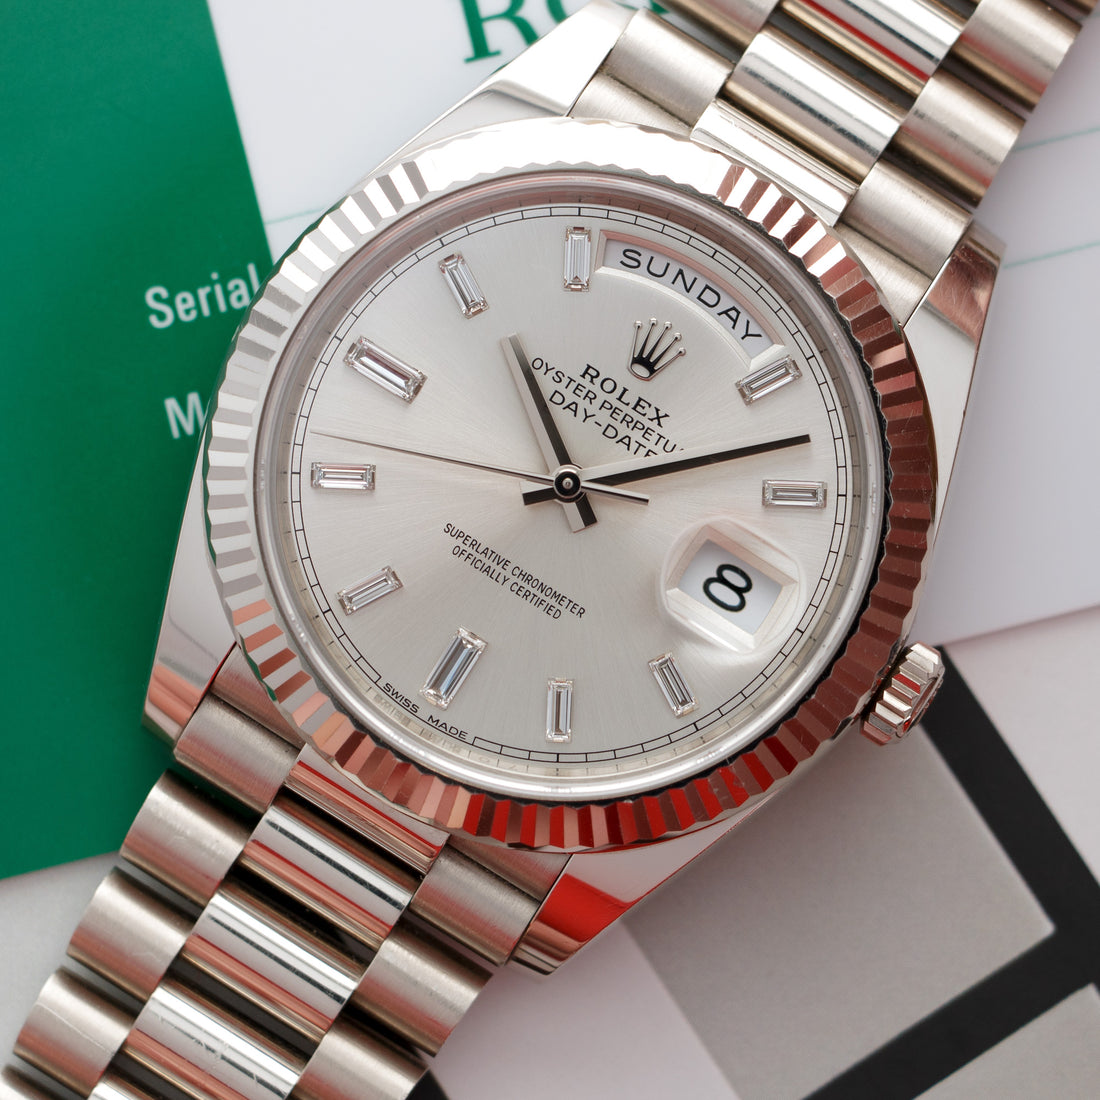 Rolex White Gold Day-Date Ref. 228239 with Factory Baguette Diamond Dial